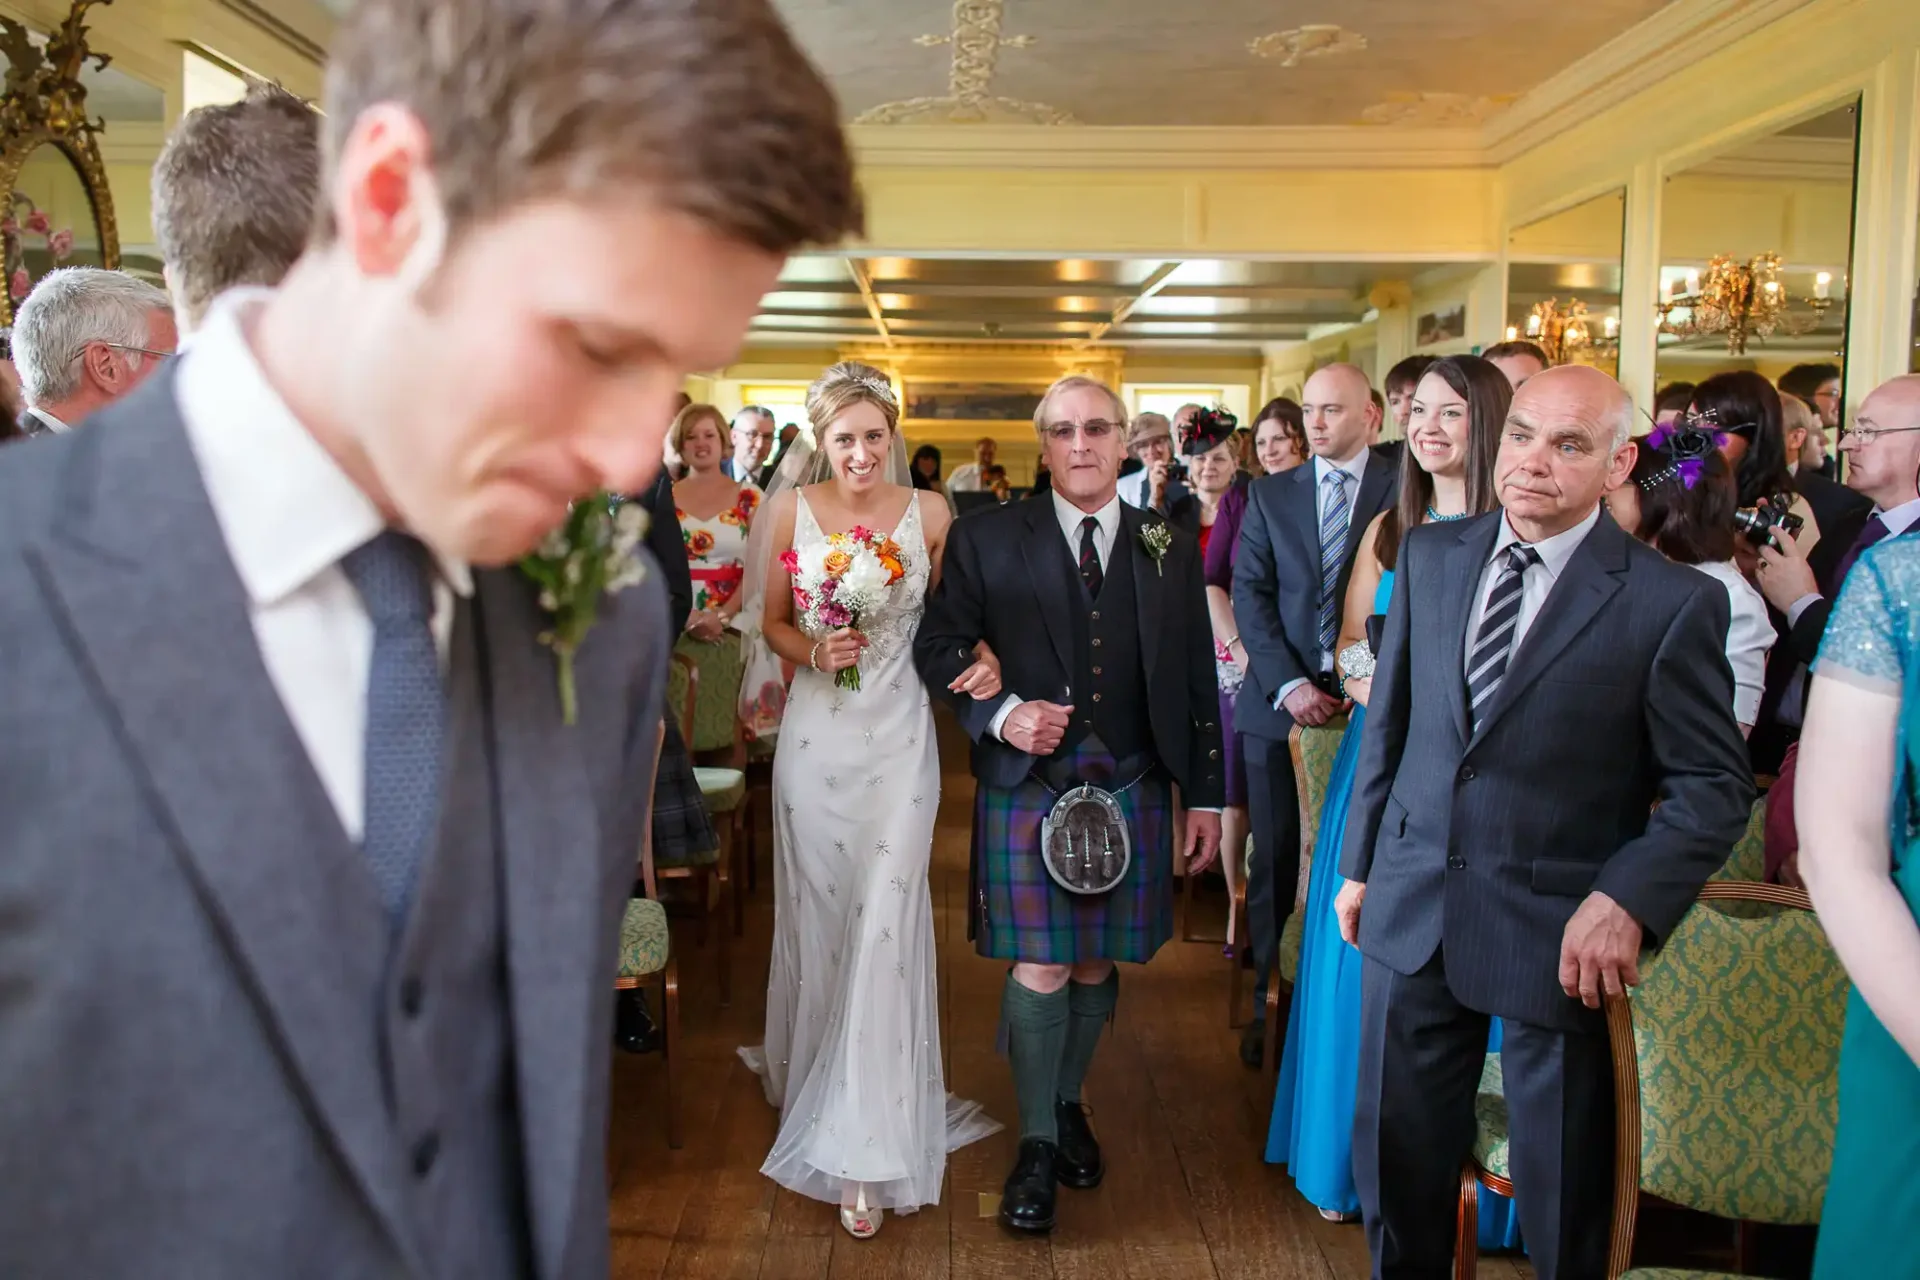 A bride walking down the aisle, accompanied by an older man in a kilt, while a groom glances downward and guests watch.